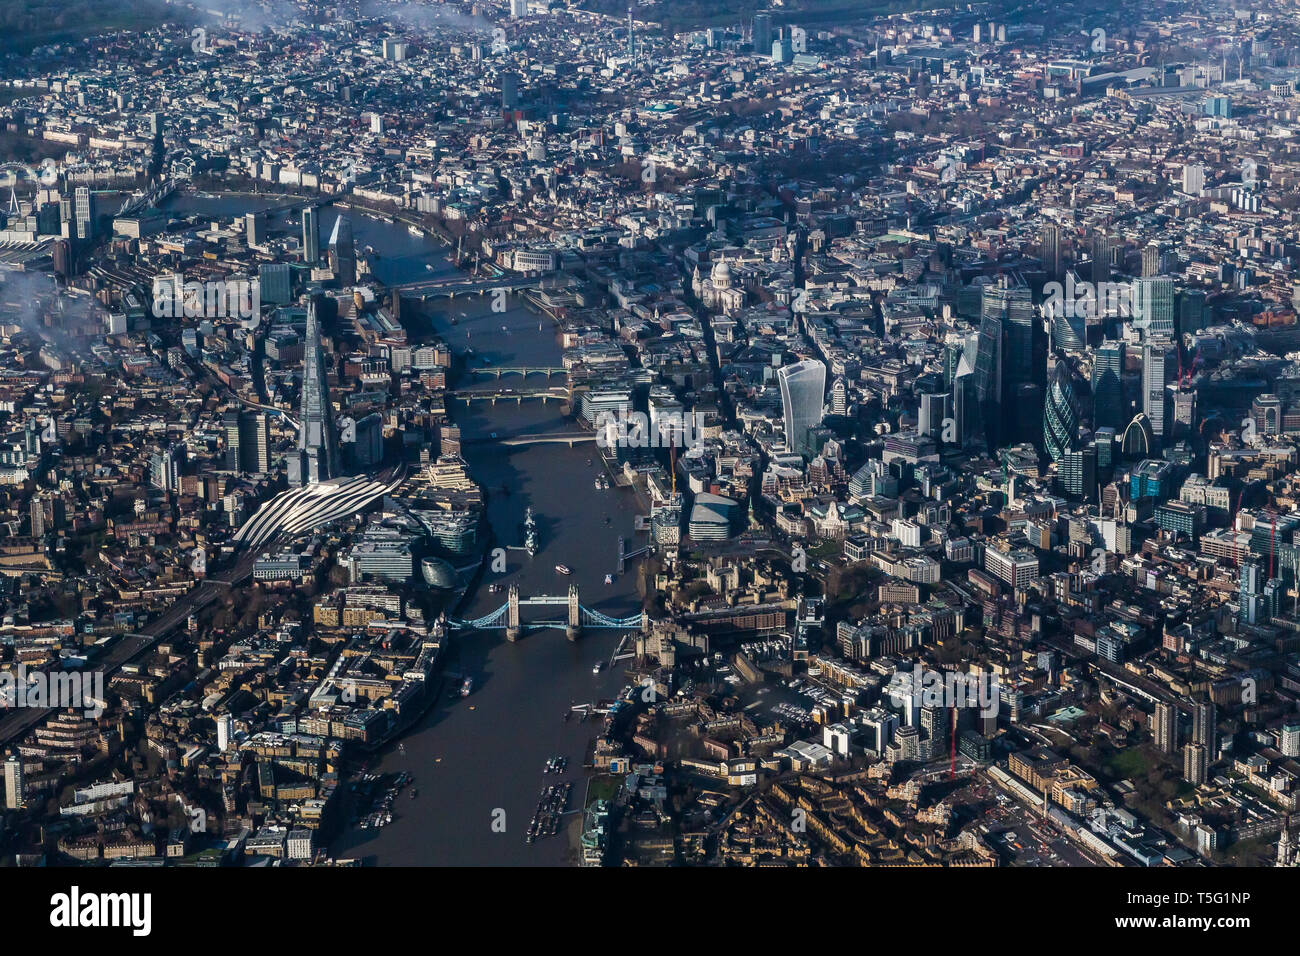 Aerial view of the Thames looking west towards Tower Bridge, the Shard and central London Stock Photo